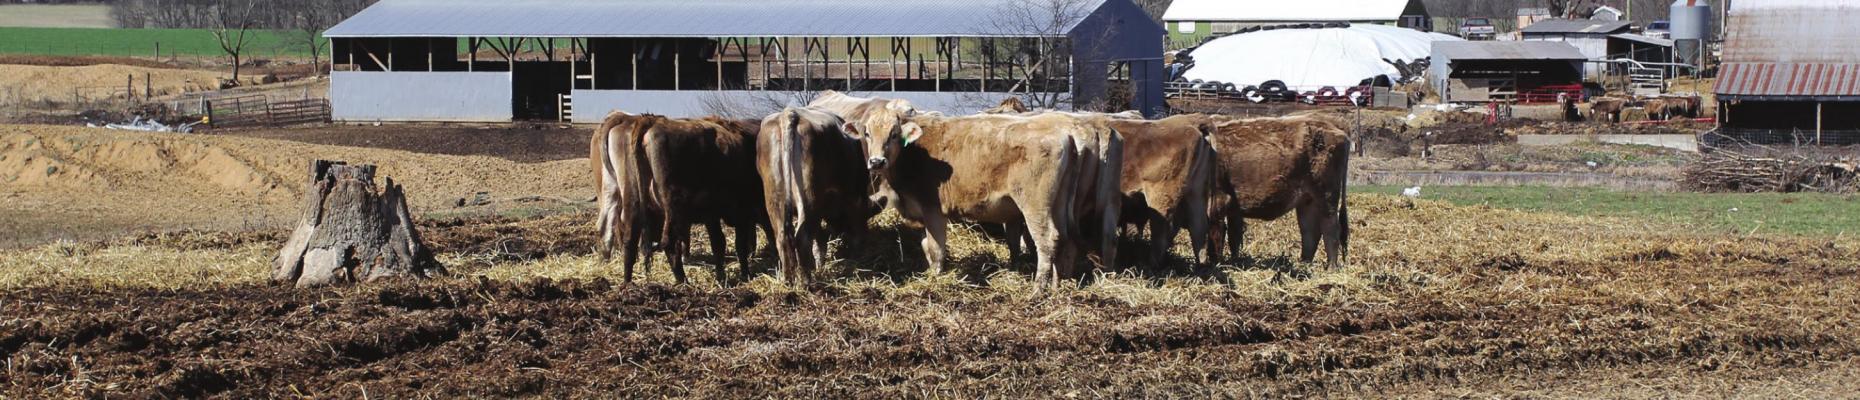 IN AN UNPRECEDENTED MOVE for the cattle industry, the Missouri Cattlemen’s Association seeks aid to address industry suffering caused by the coronavirus.